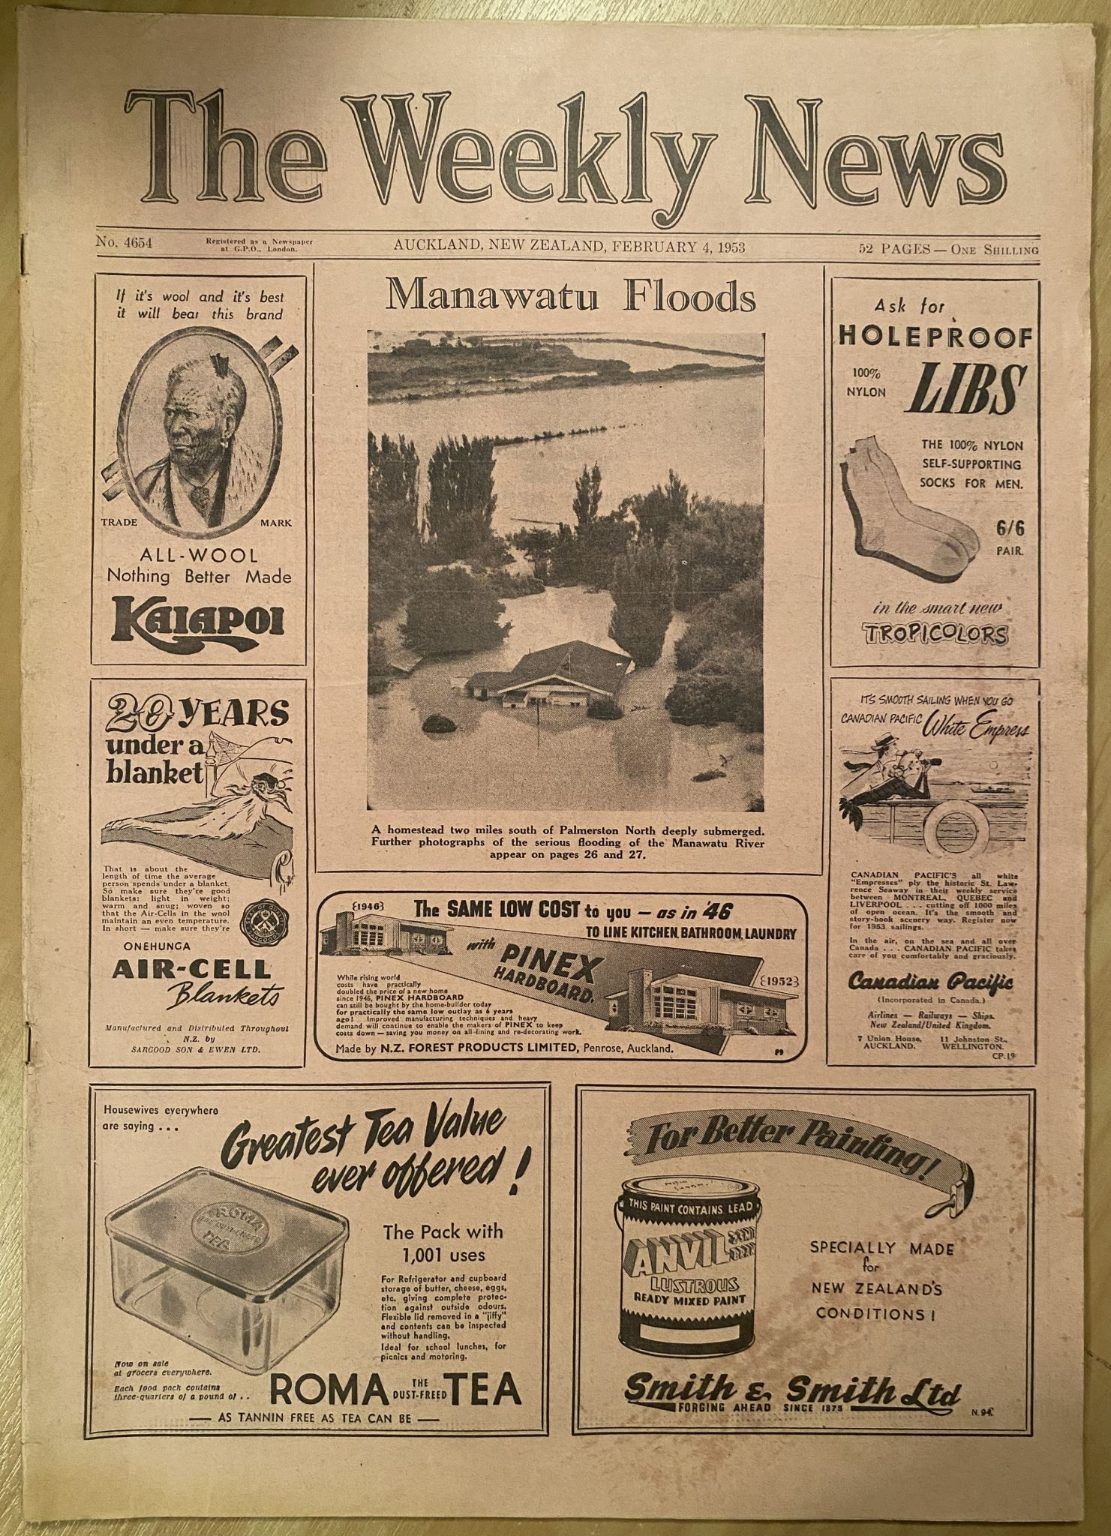 OLD NEWSPAPER: The Weekly News - No. 4654, 4 February 1953